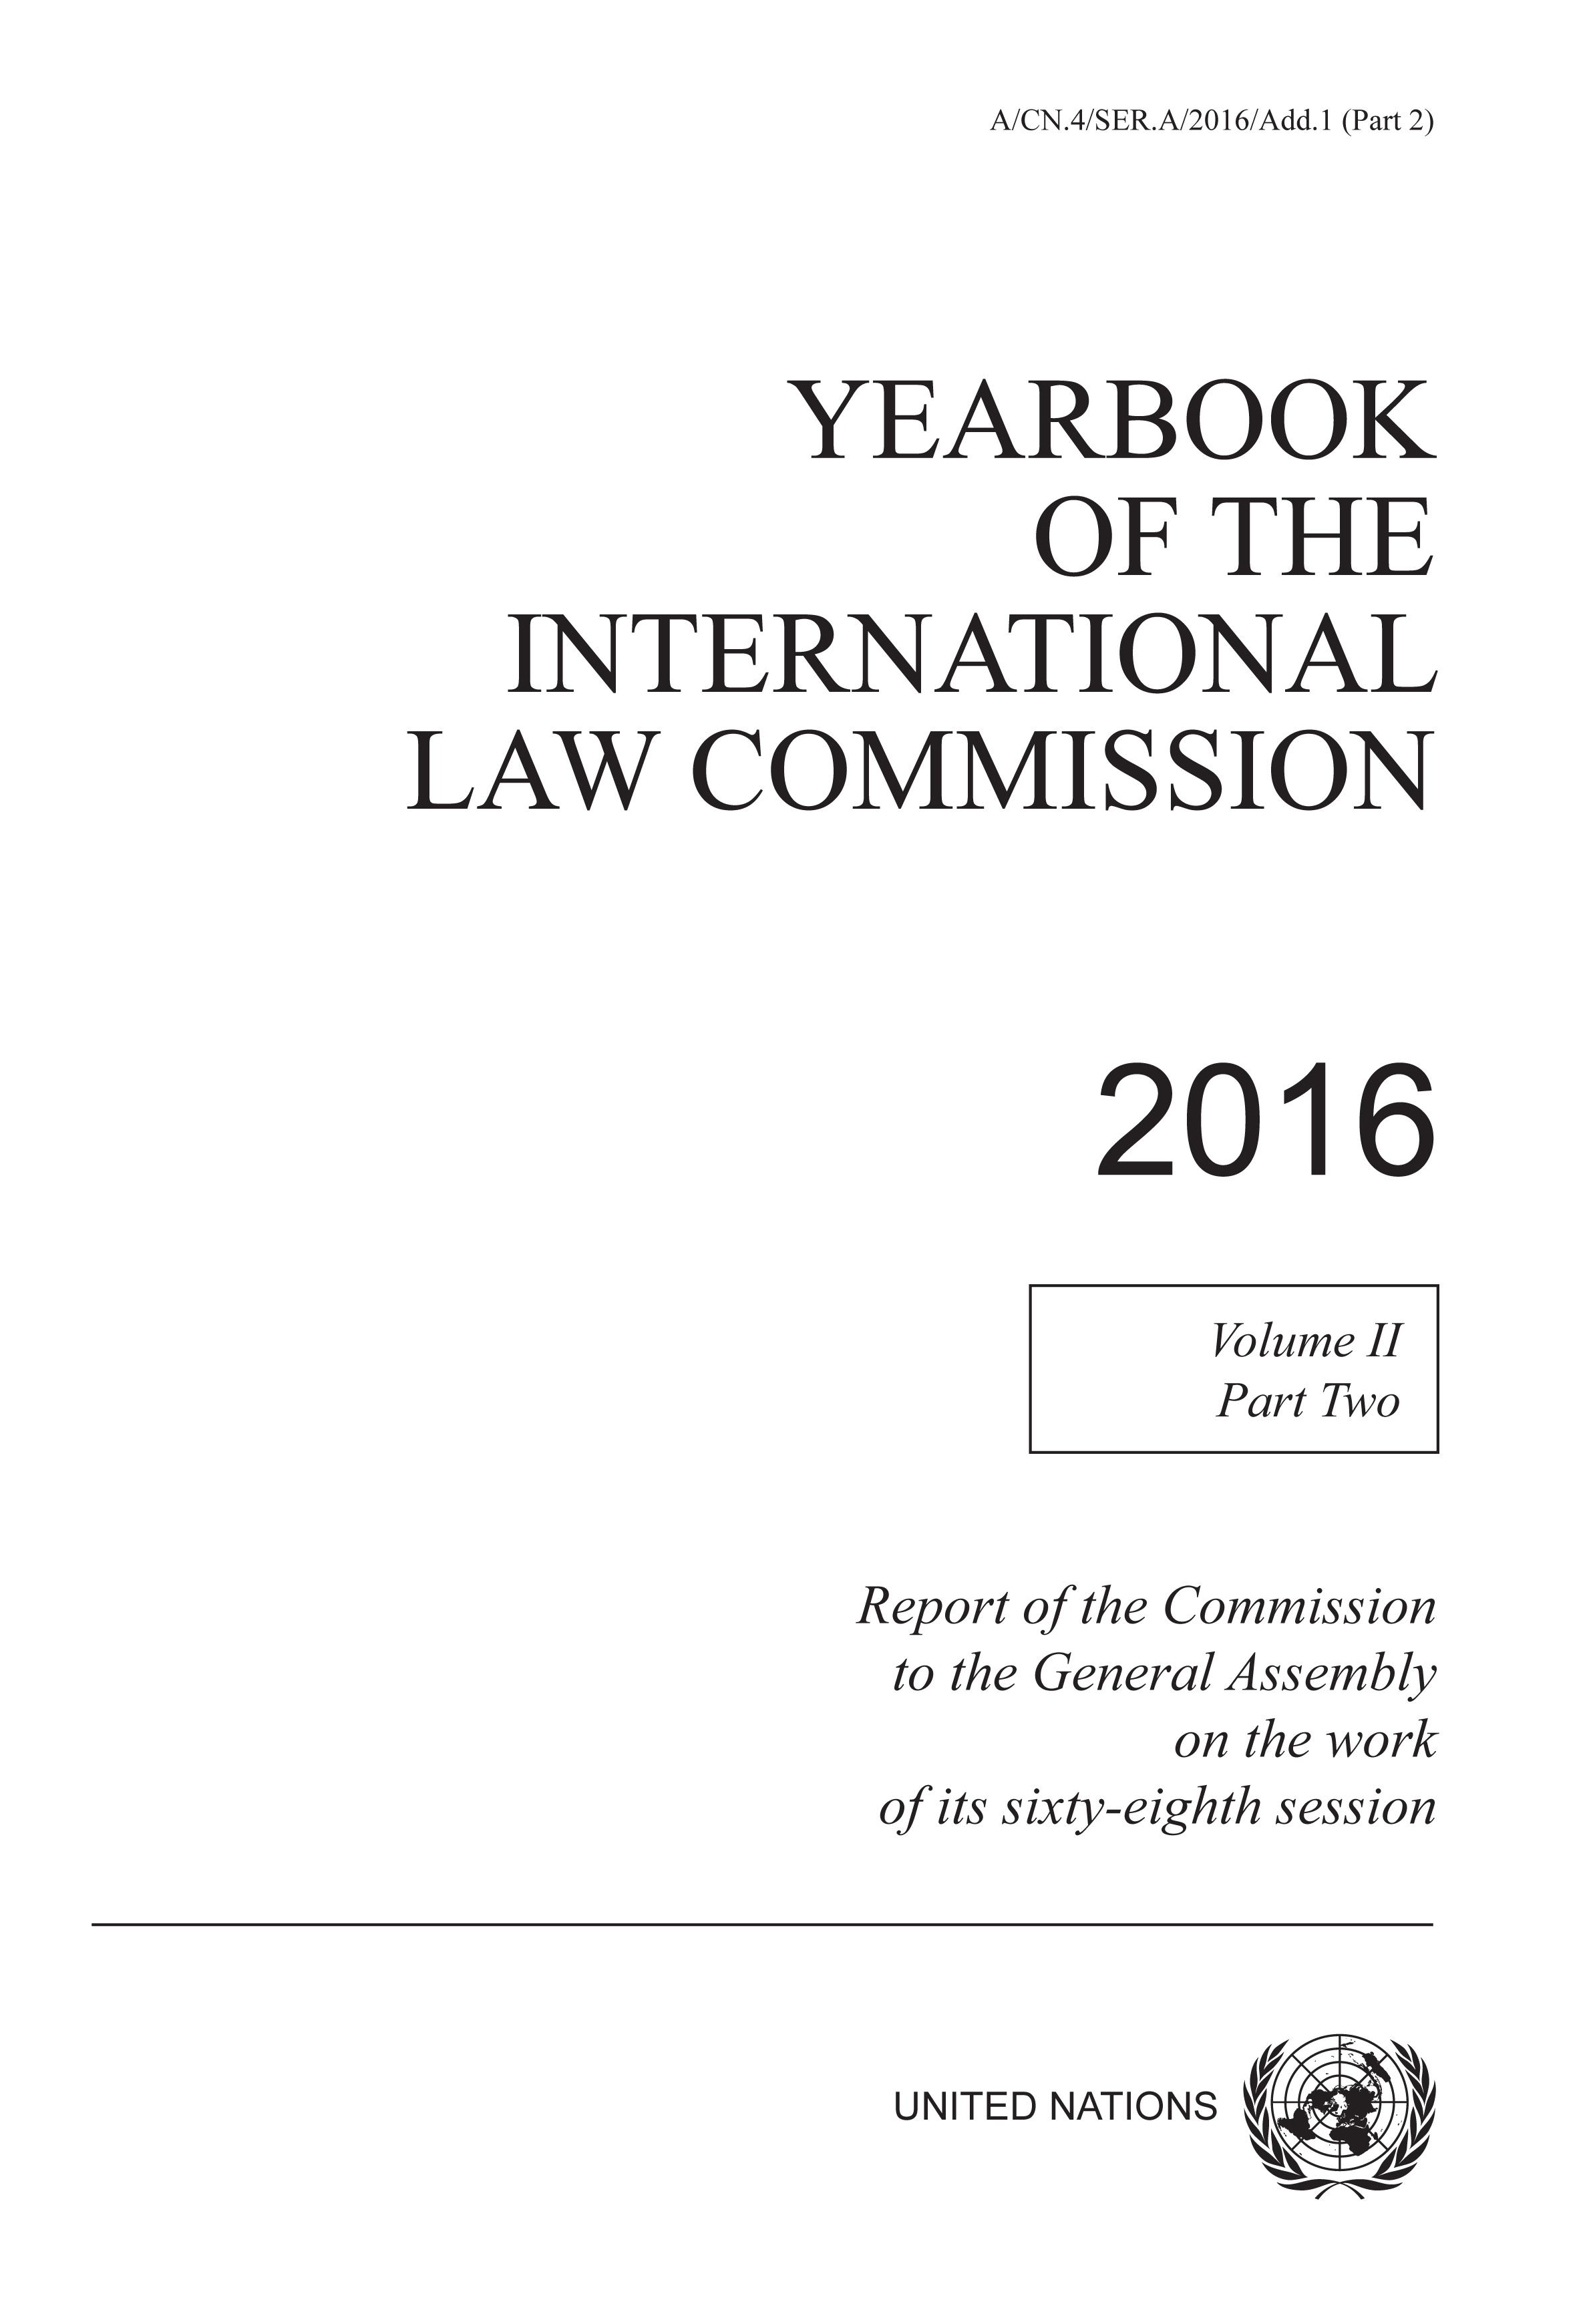 image of Yearbook of the International Law Commission 2016, Vol. II, Part 2